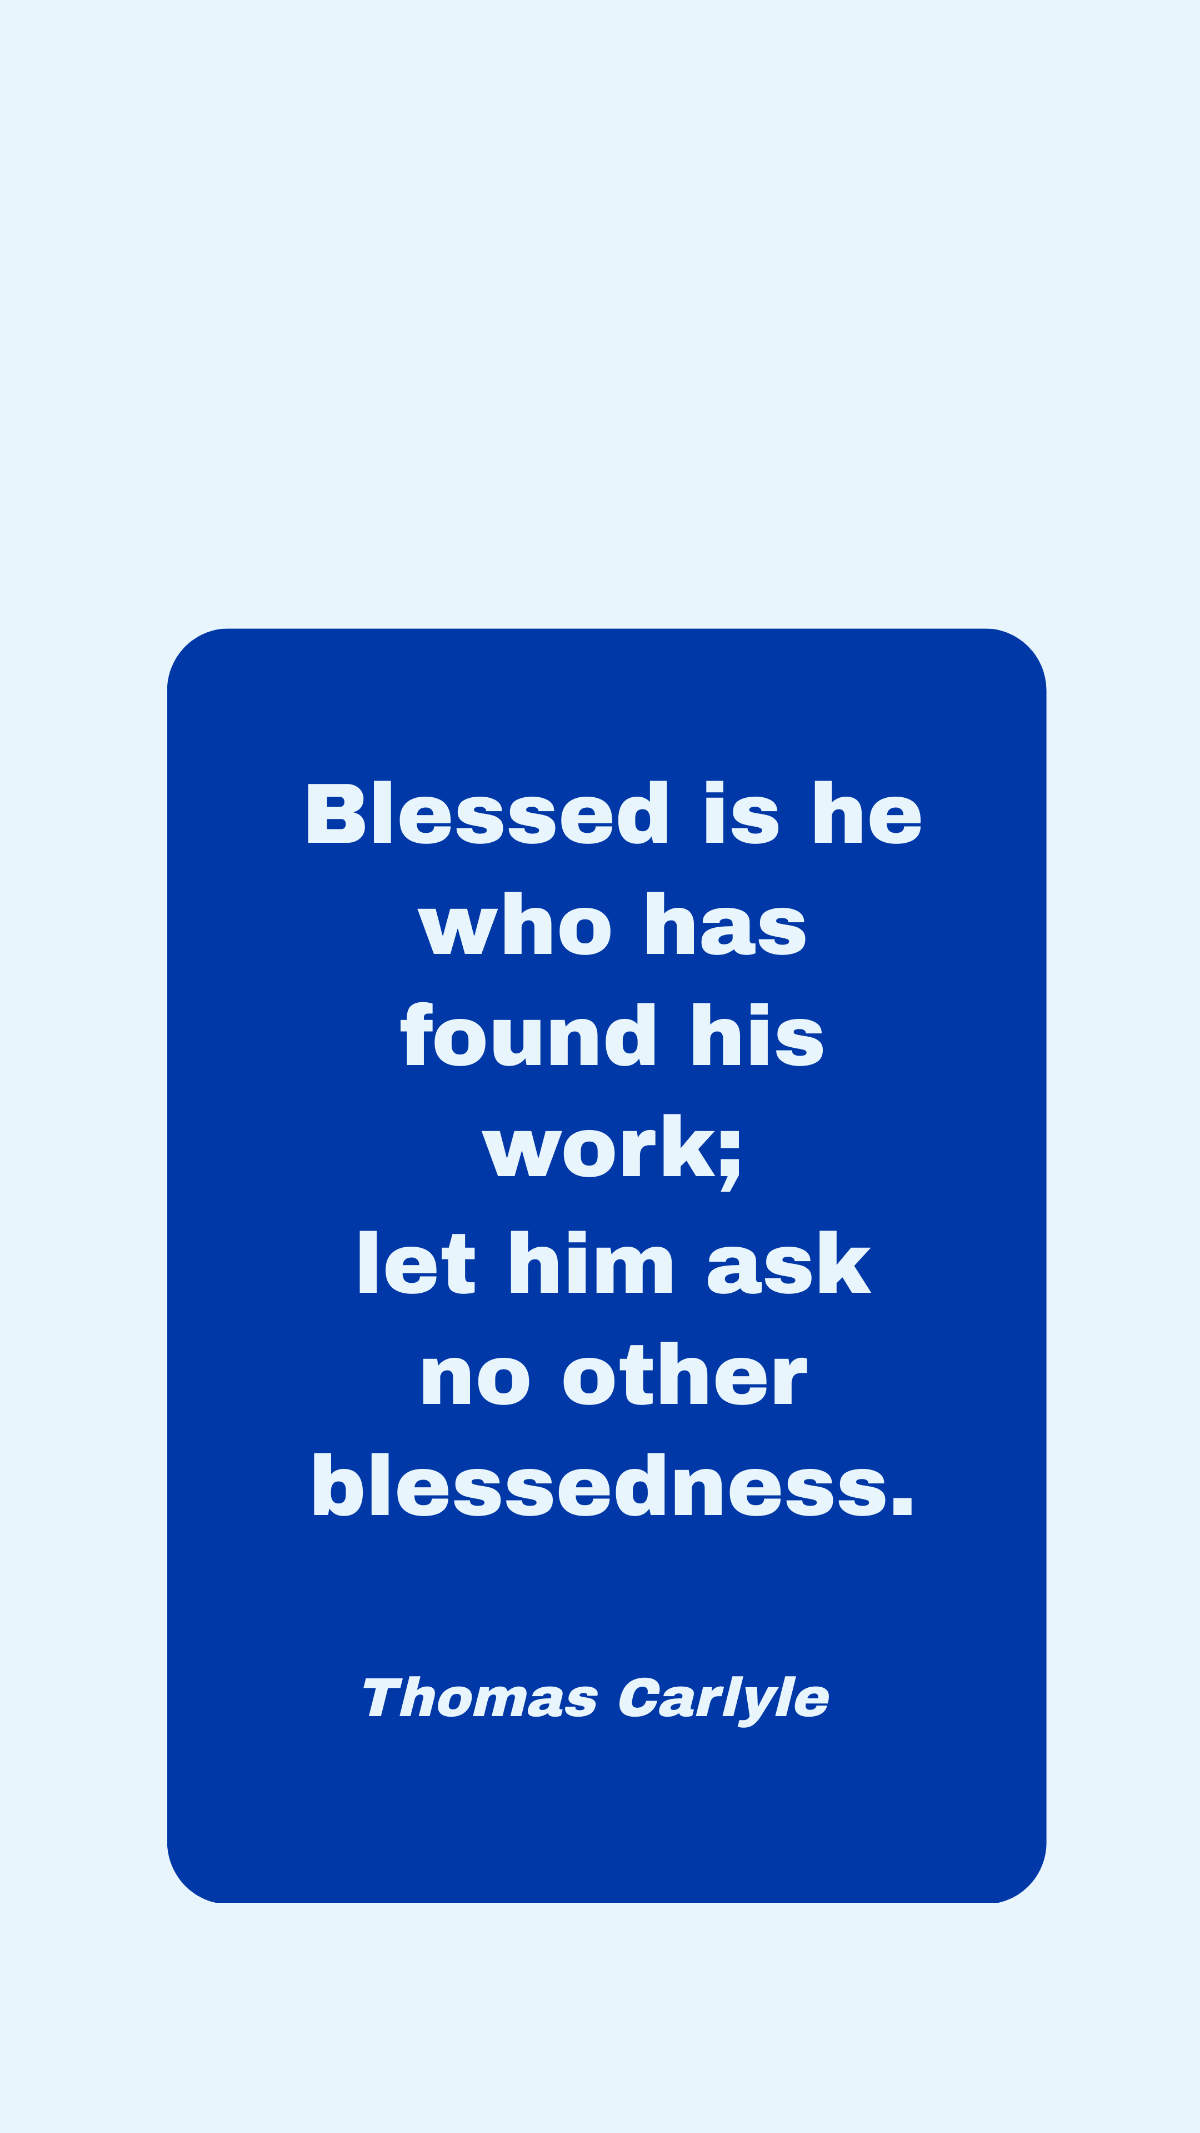 Thomas Carlyle - Blessed is he who has found his work; let him ask no other blessedness.